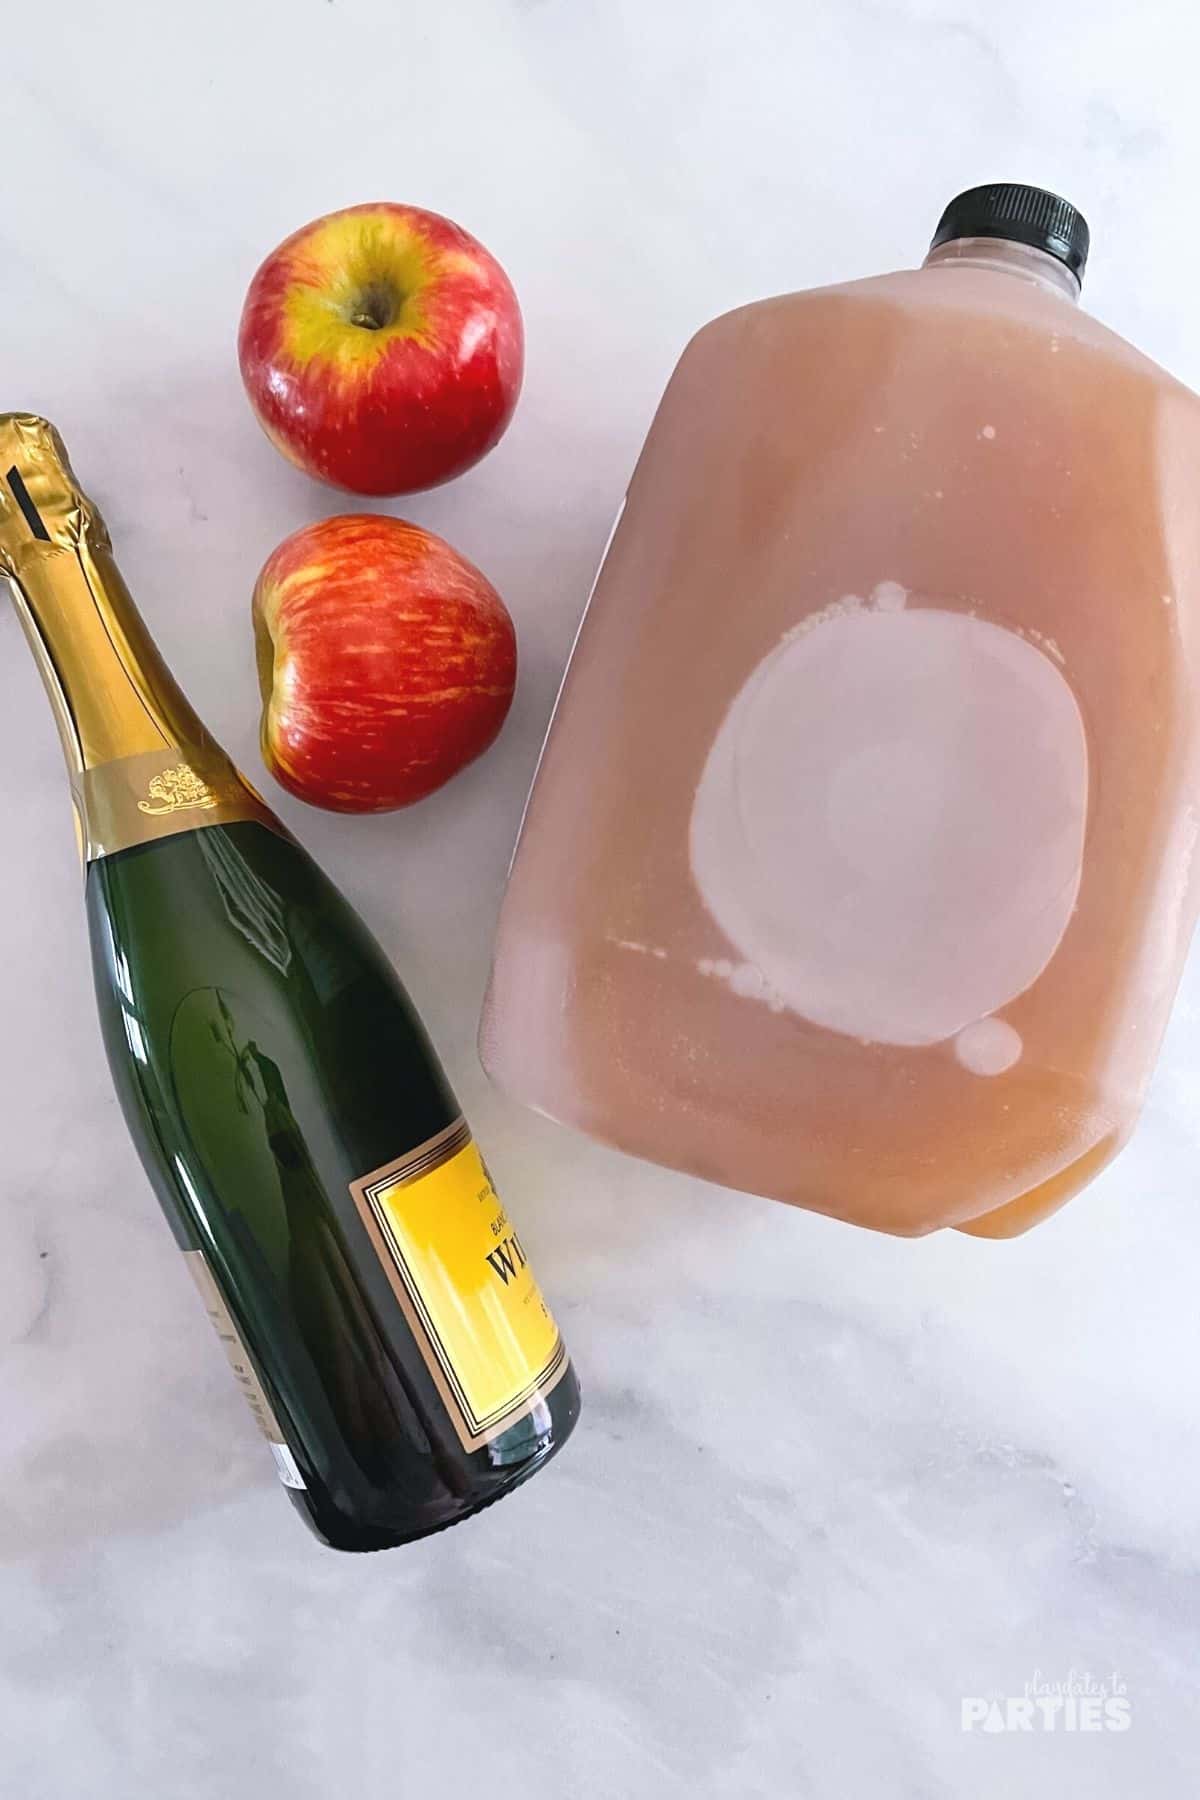 Ingredients on a marble surface include champagne, apples, and apple cider.